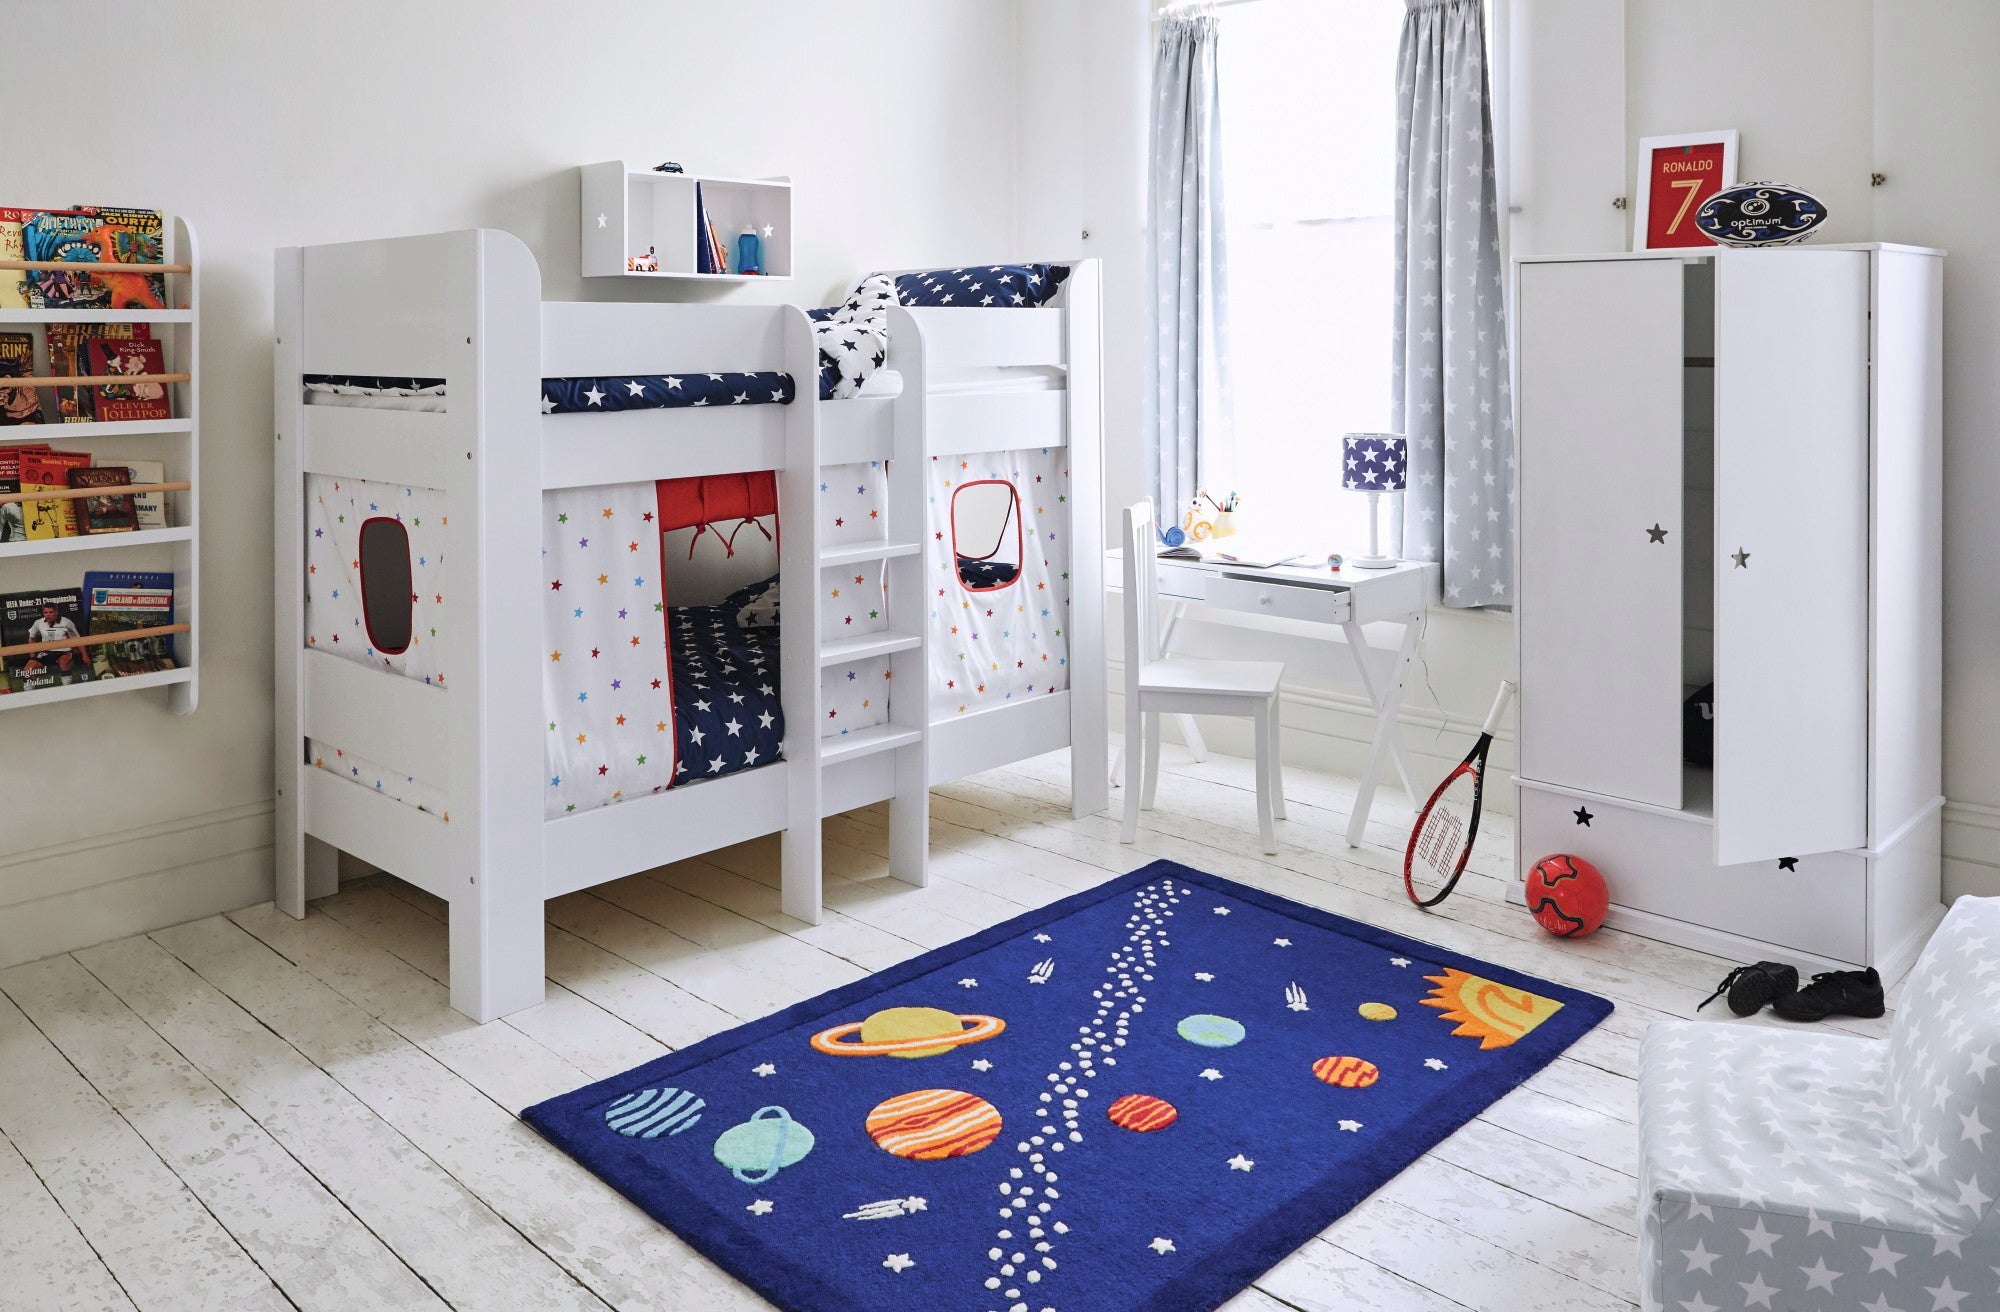 A guide to GLTC's children's beds range